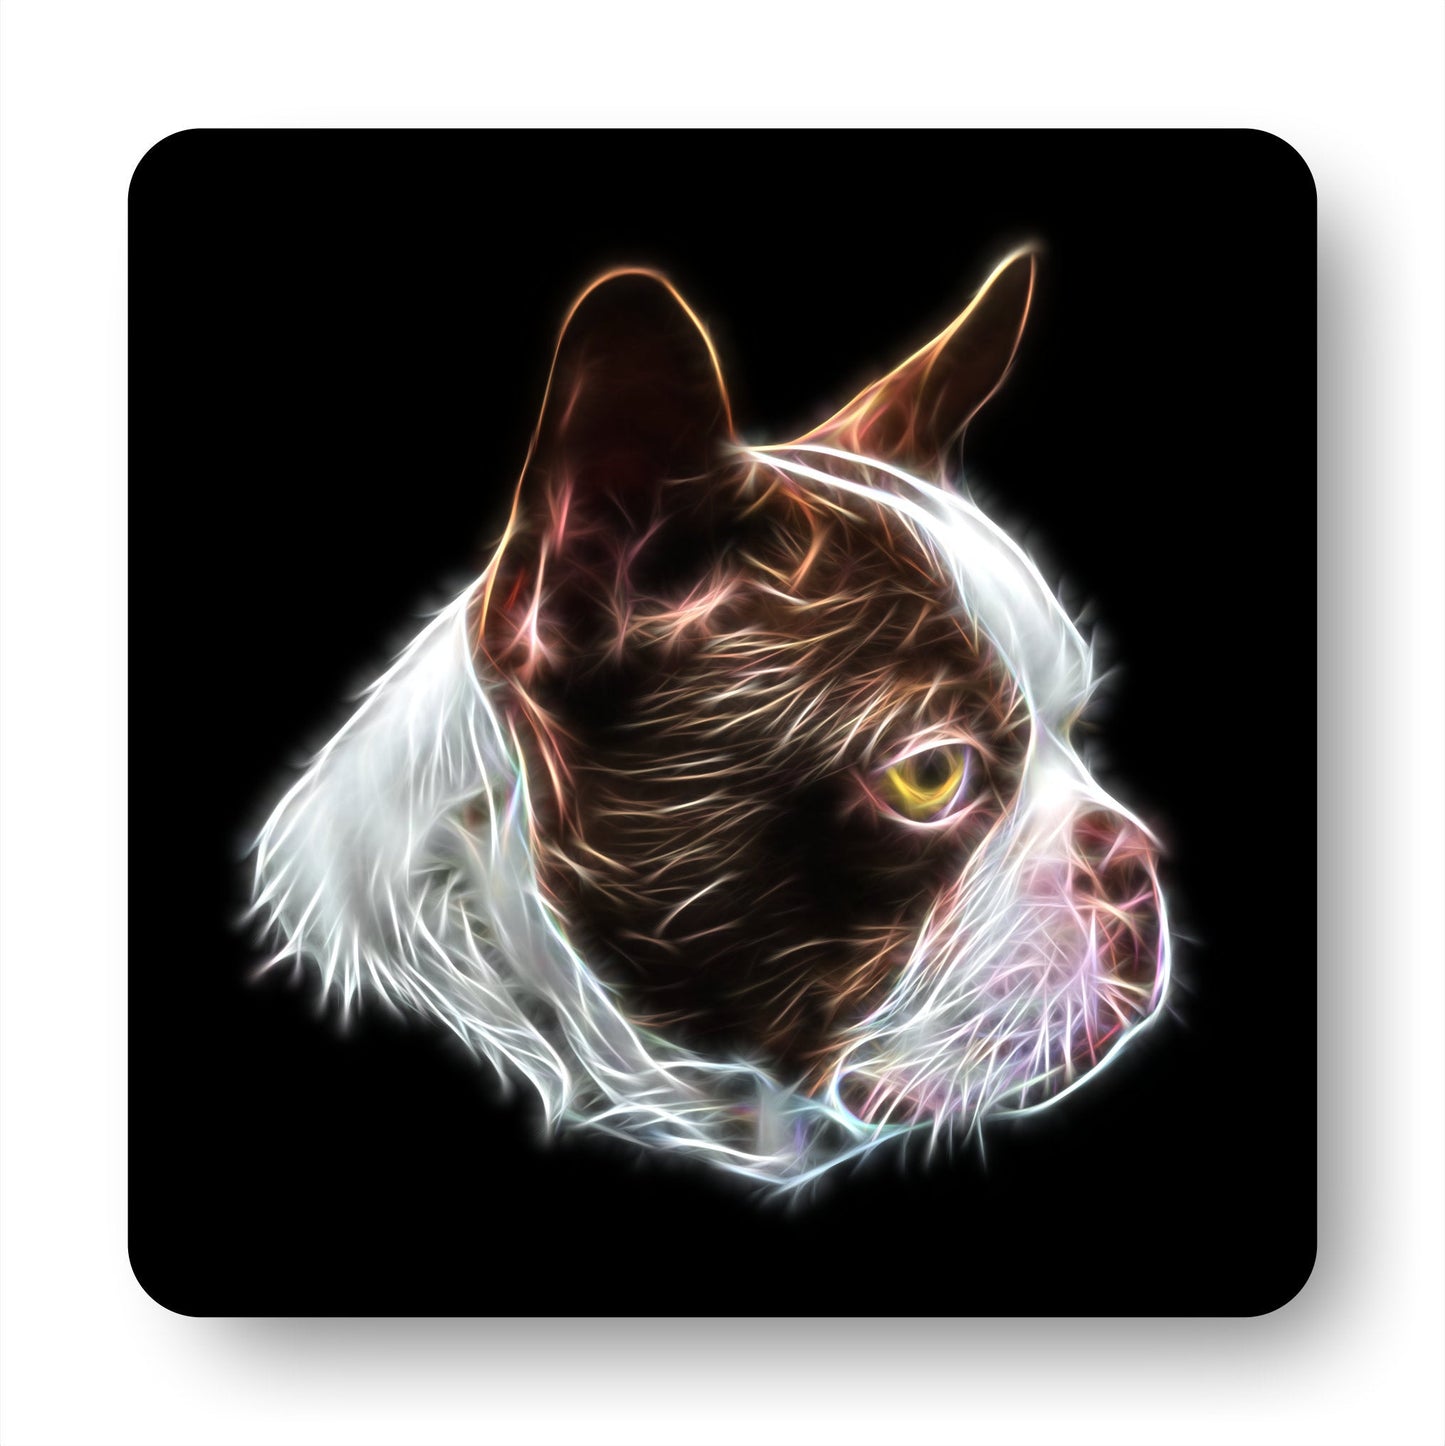 Brown and White Boston Terrier Coasters, Set of 2, with Stunning Fractal Art Design.